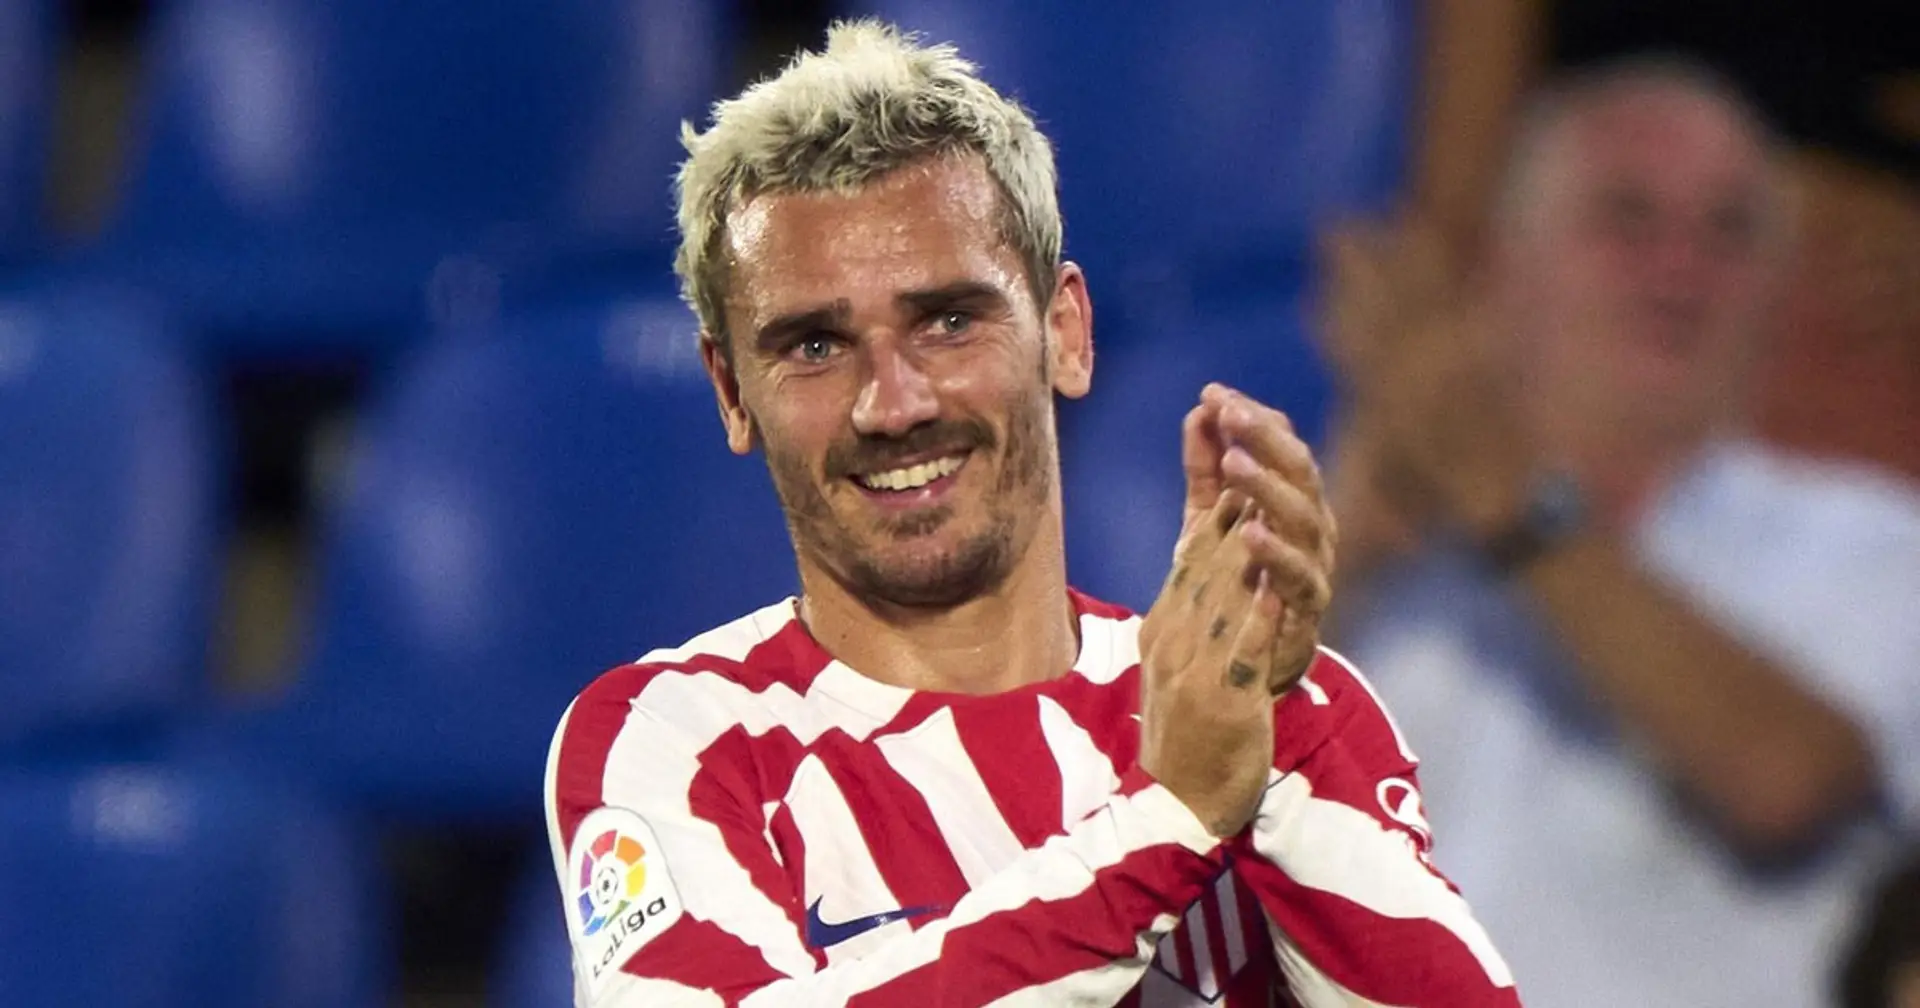 Griezmann scores first league goal in almost 9 months